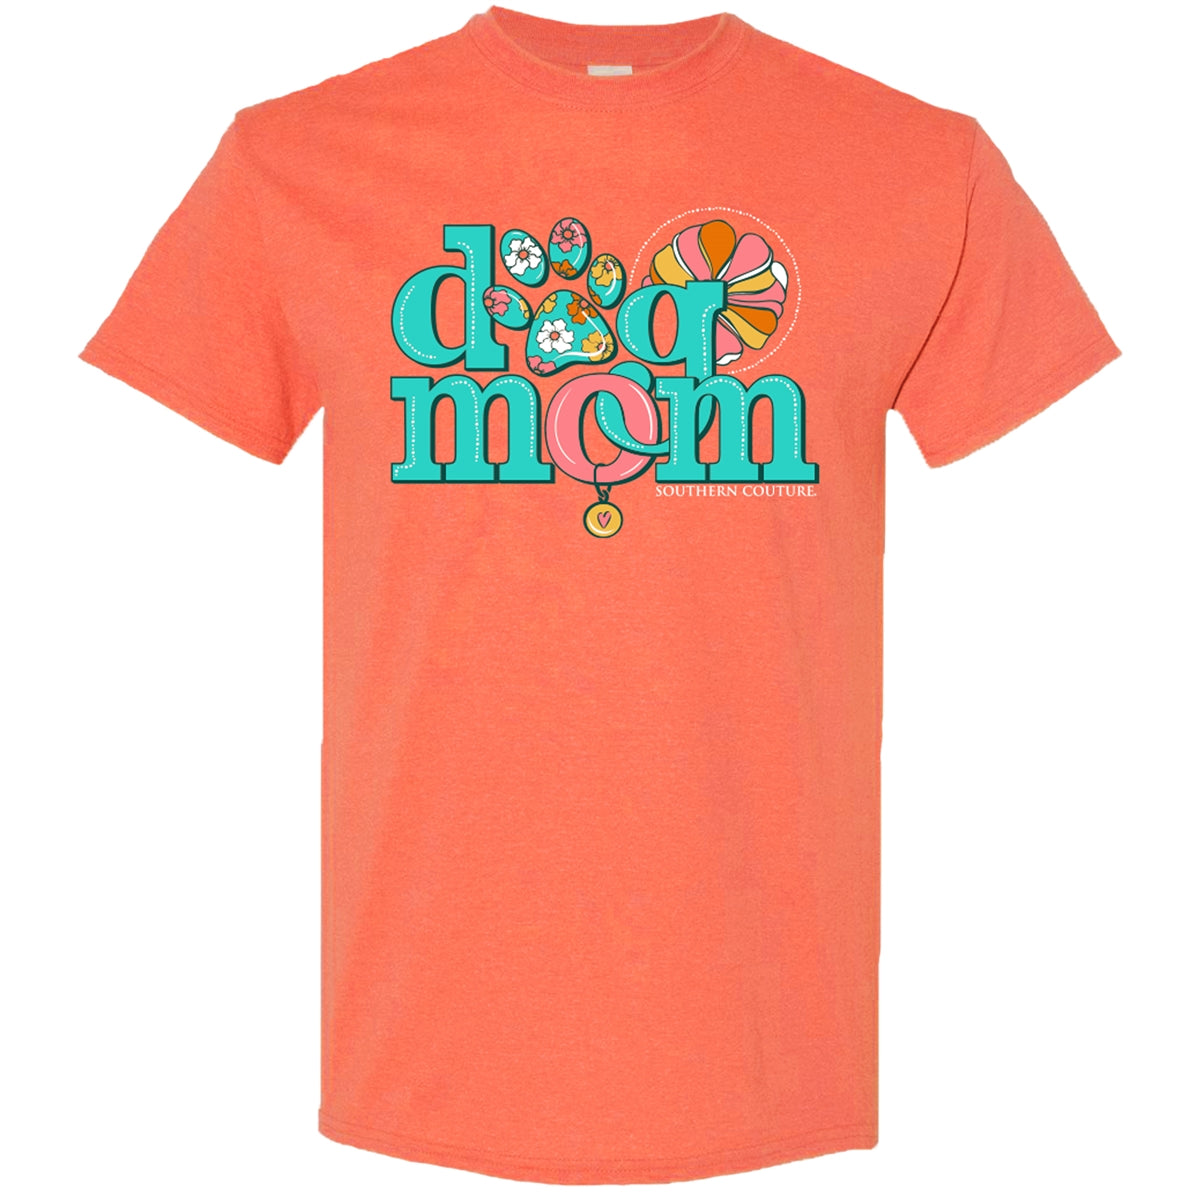 Southern Couture Soft Collection Dog Mom T-Shirt